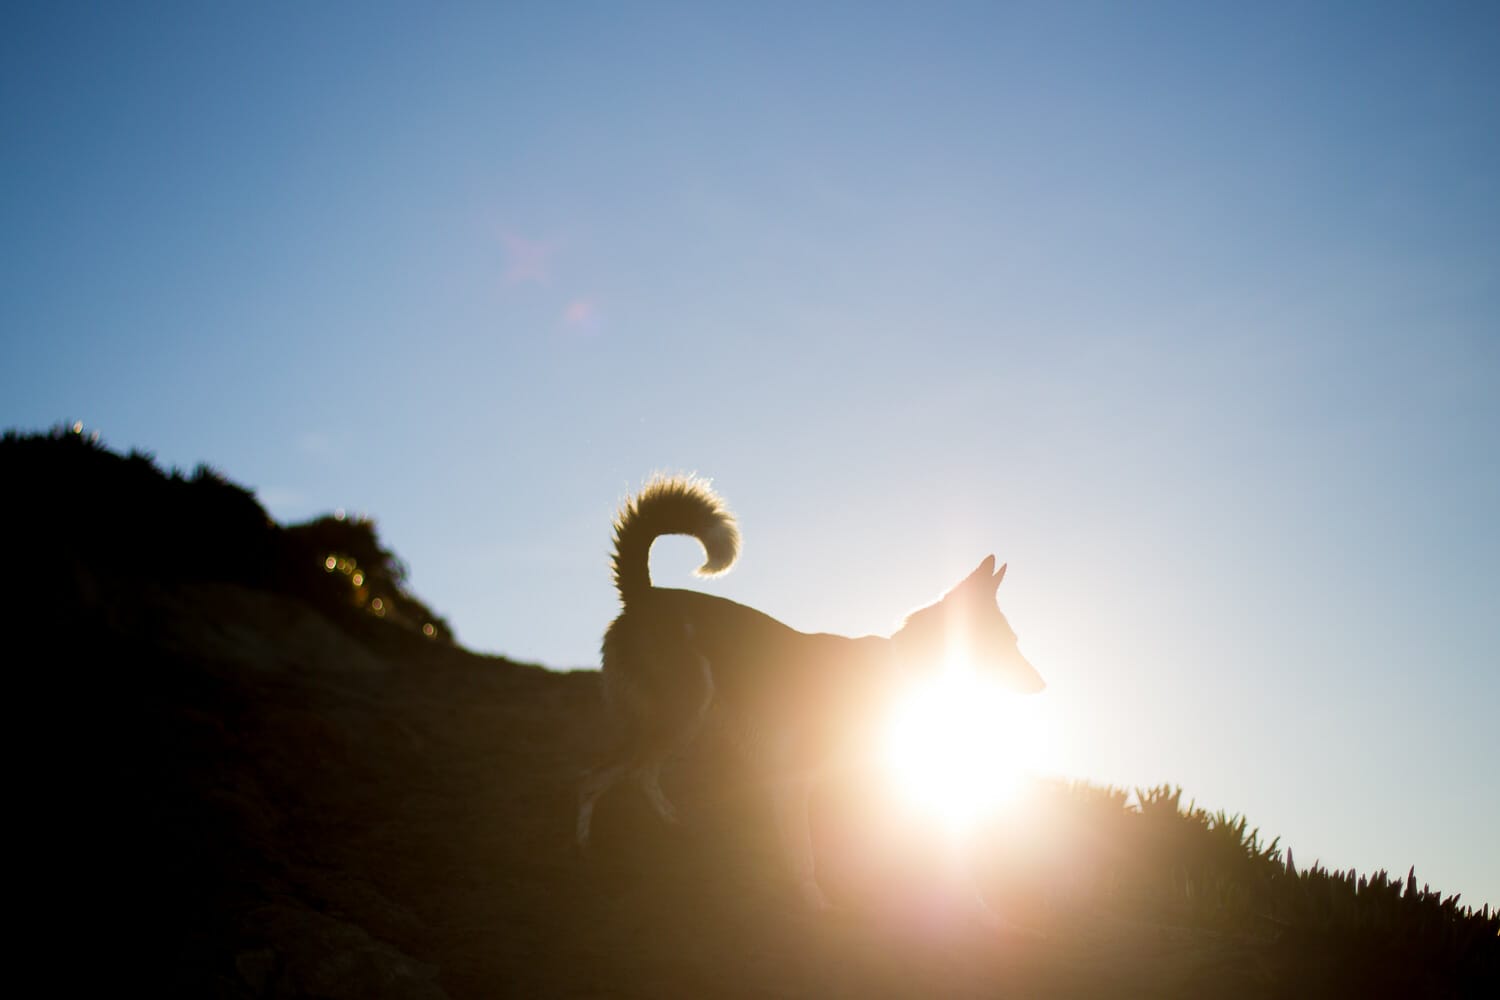 Dog silhouetted against the sun on a hillside at dusk.